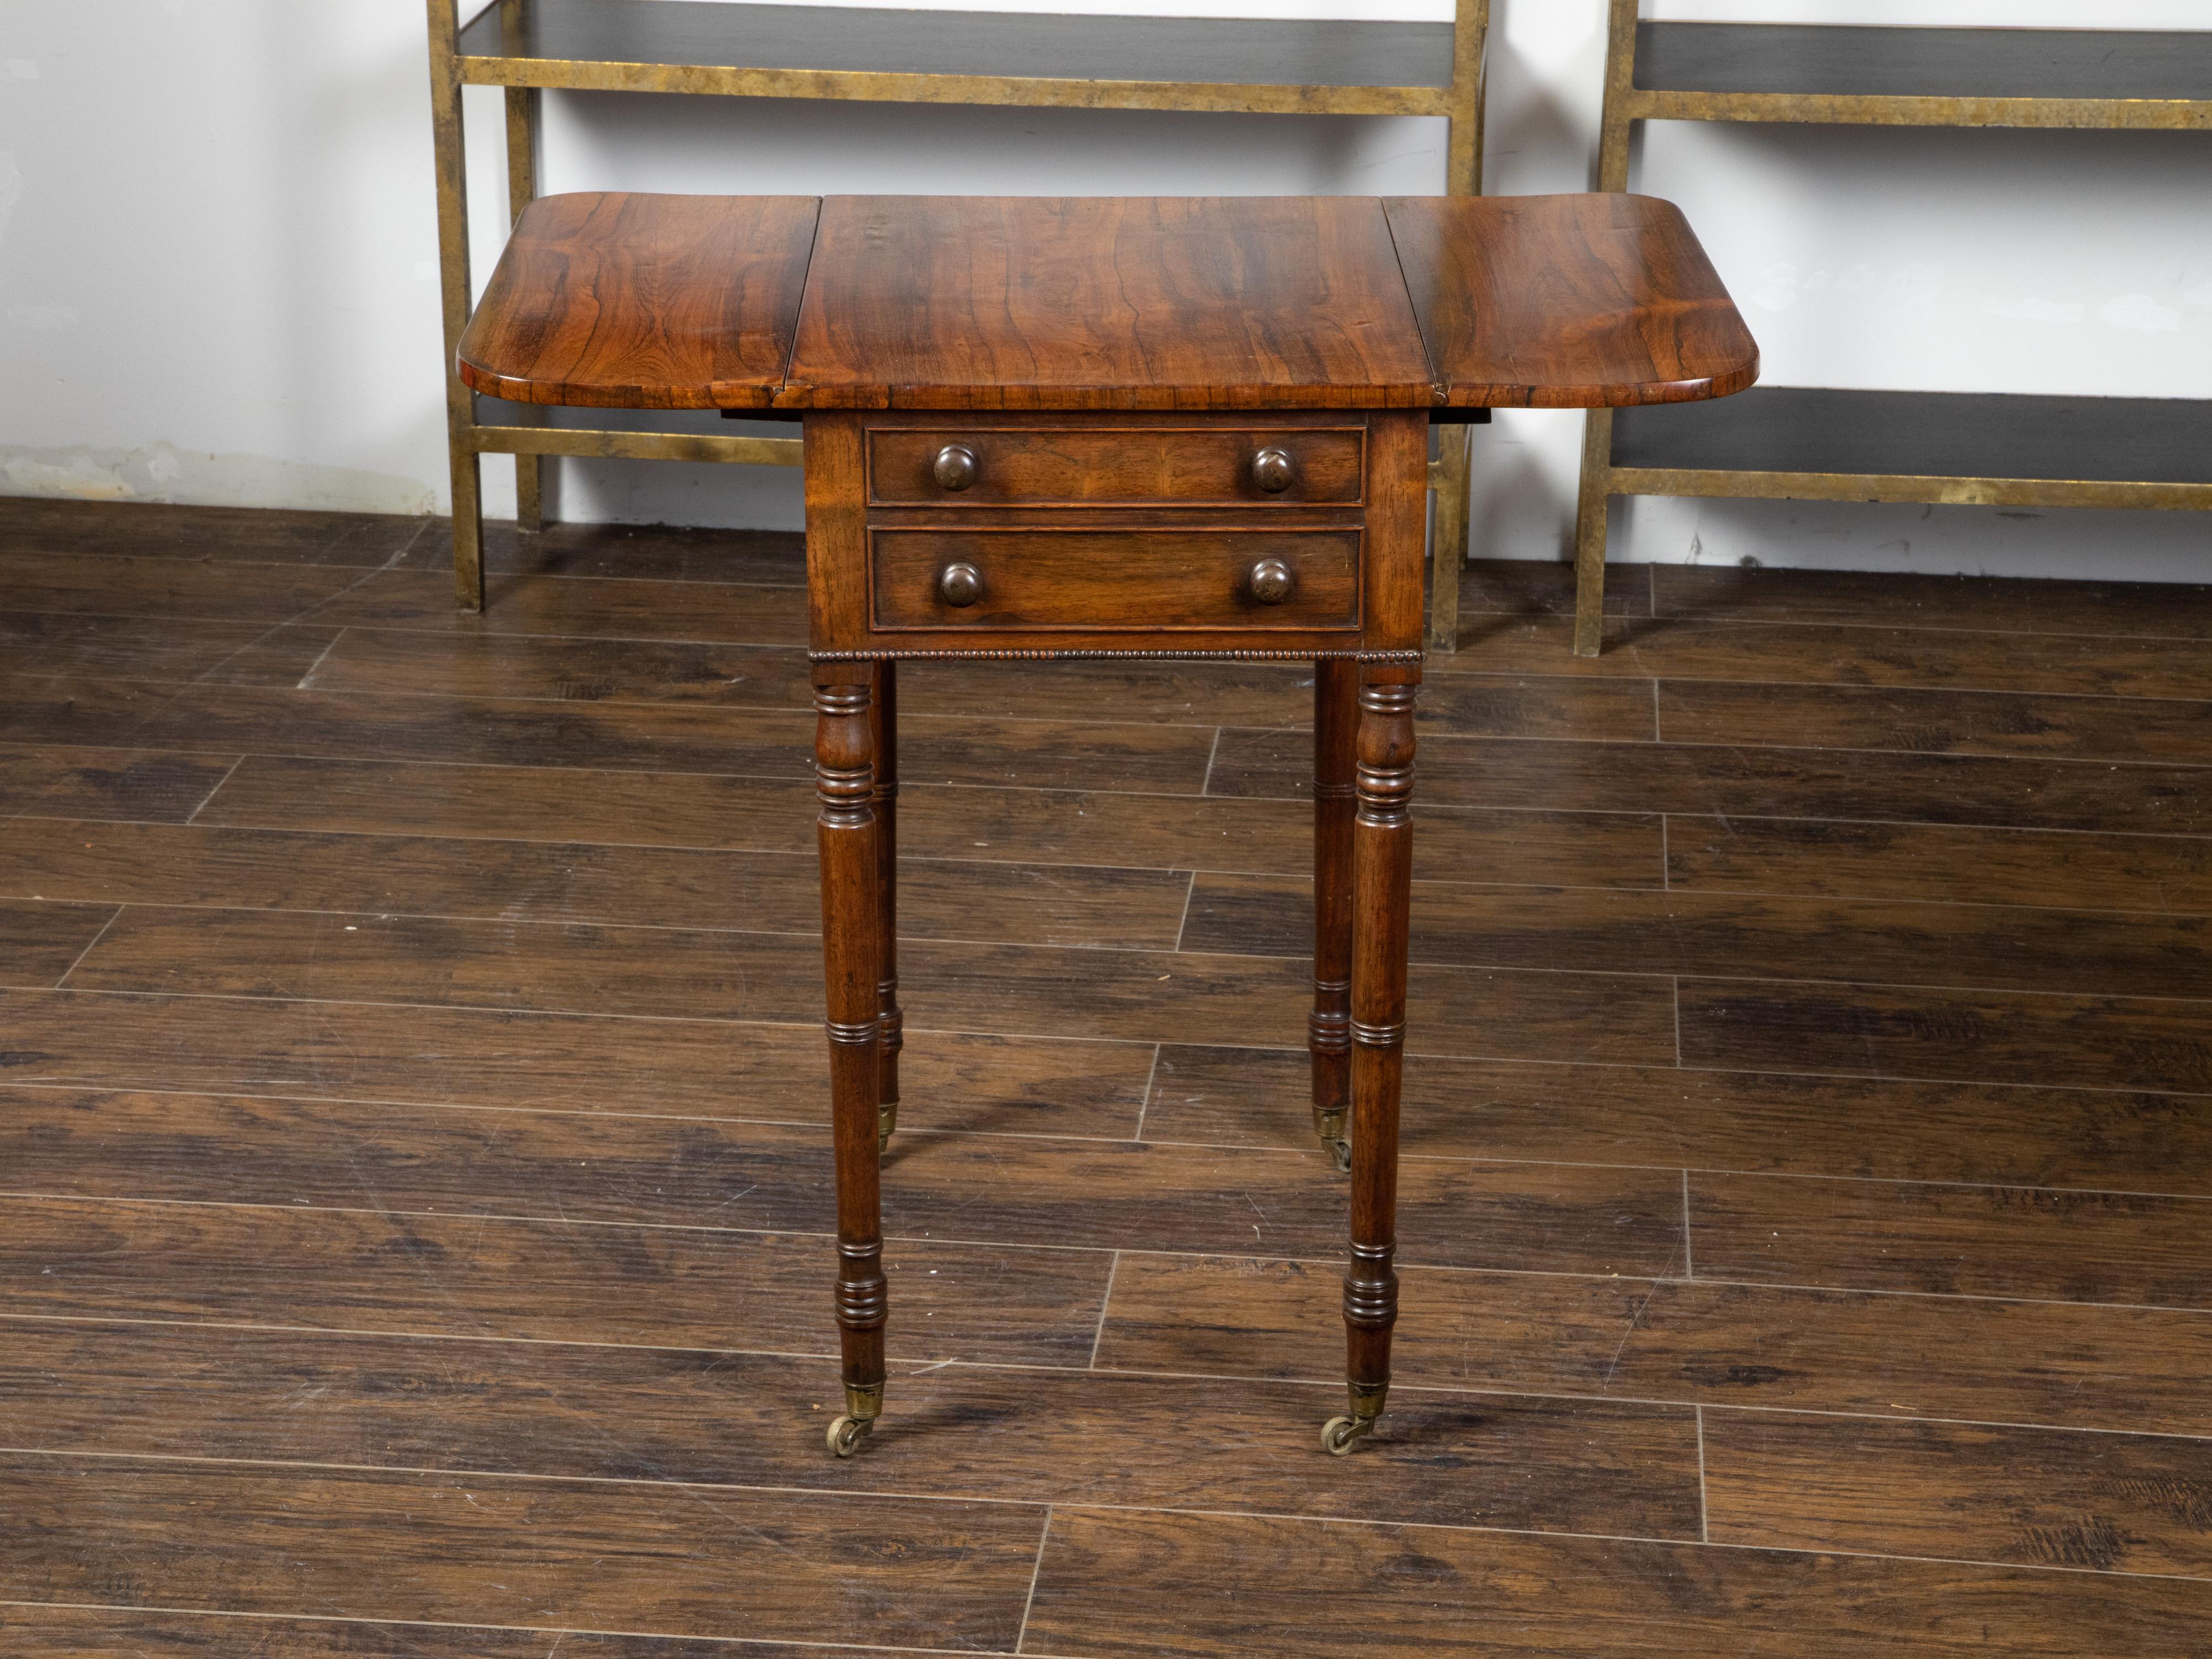 Brass English Regency 1820s Mahogany Pembroke Table with Drop Leaves and Drawers For Sale